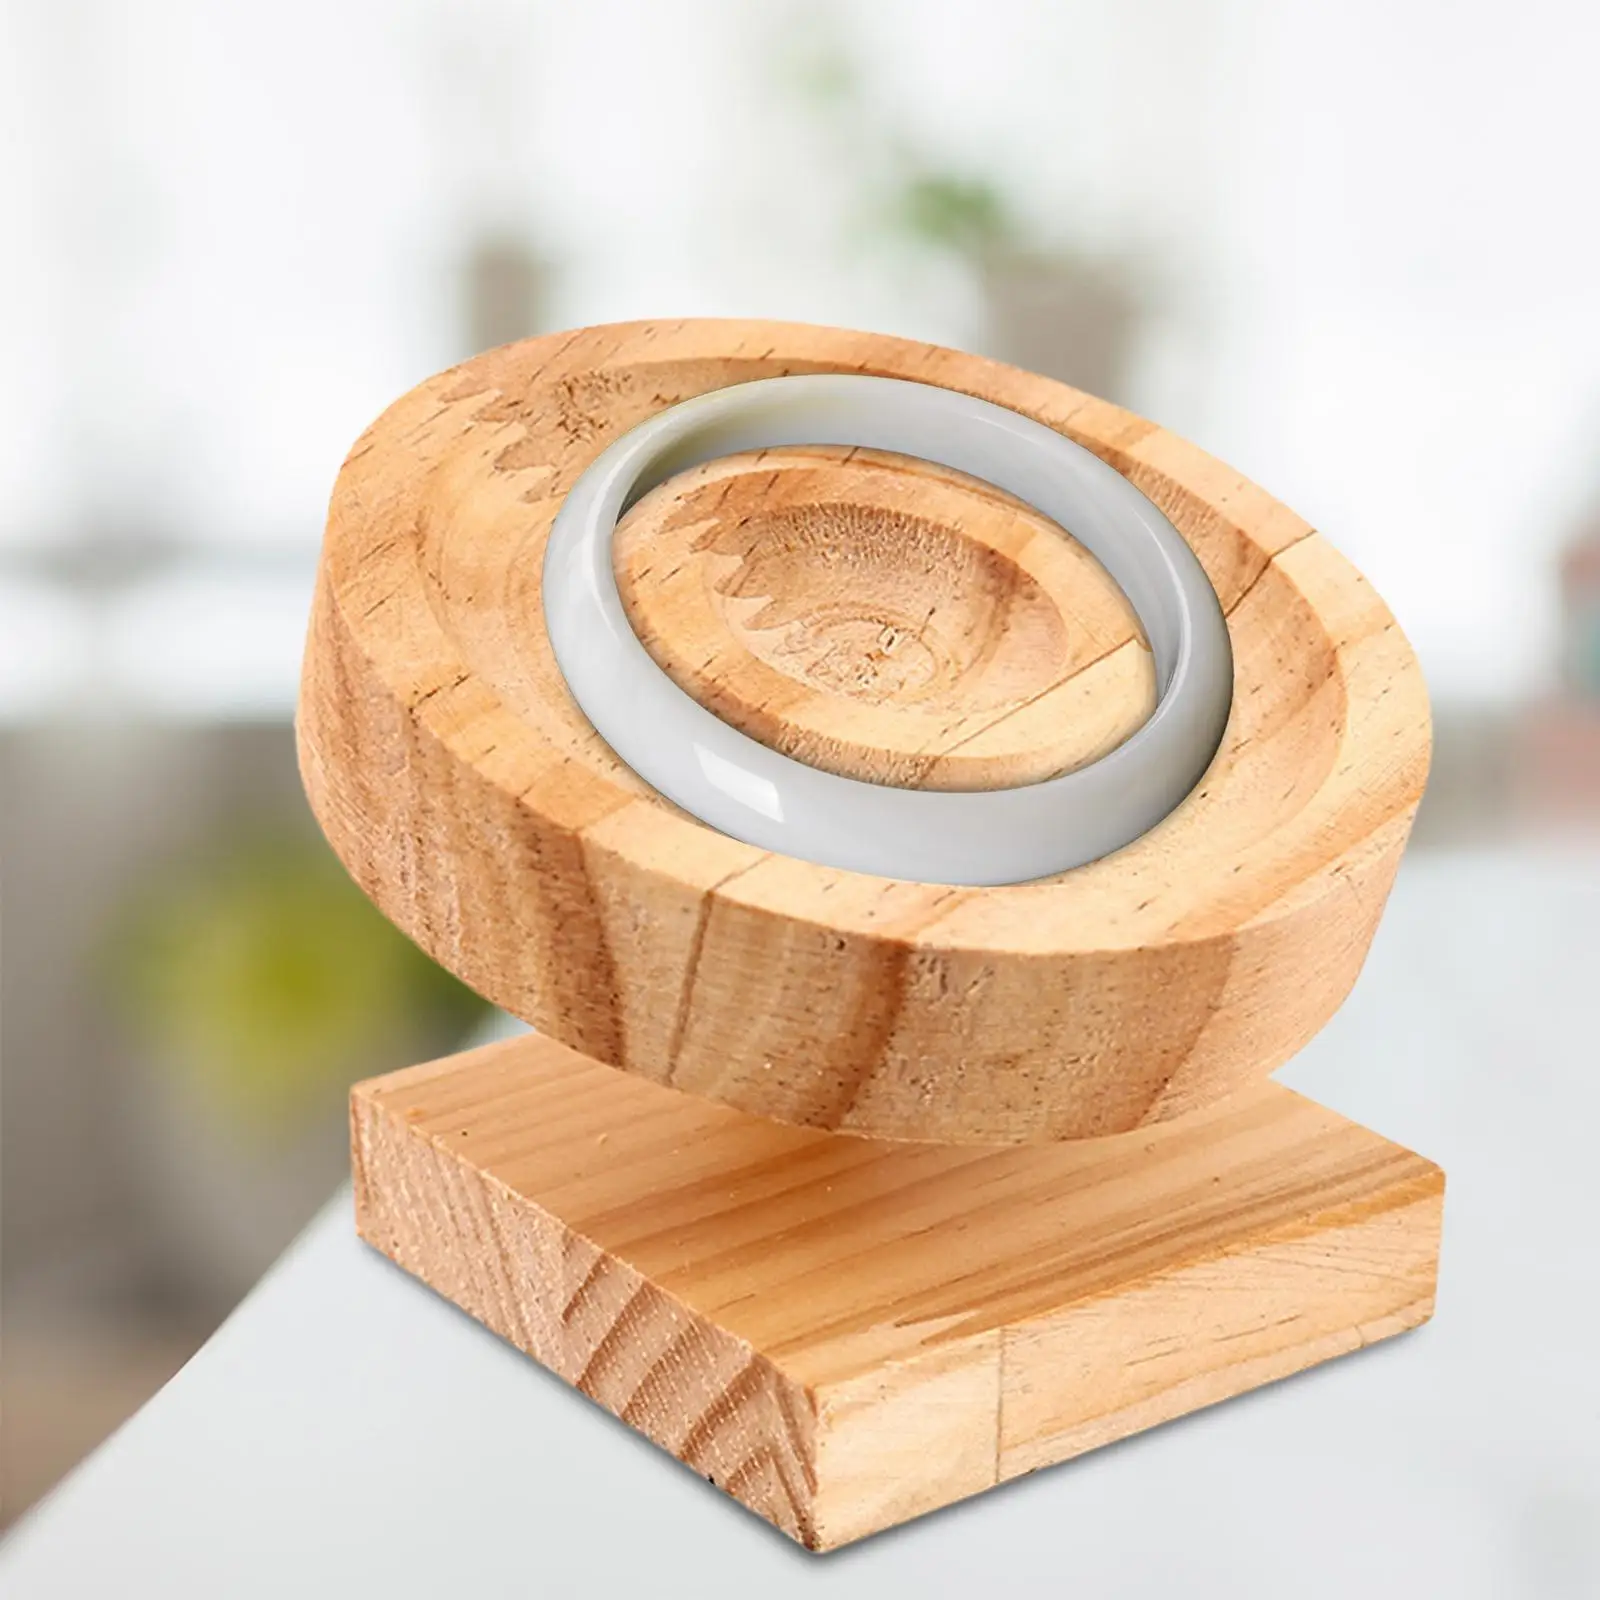 Round Bracelet Bangle Display Tray Stand Birthday Gift Organizer Holder Wooden for Store Countertop Shop Showcase Retail